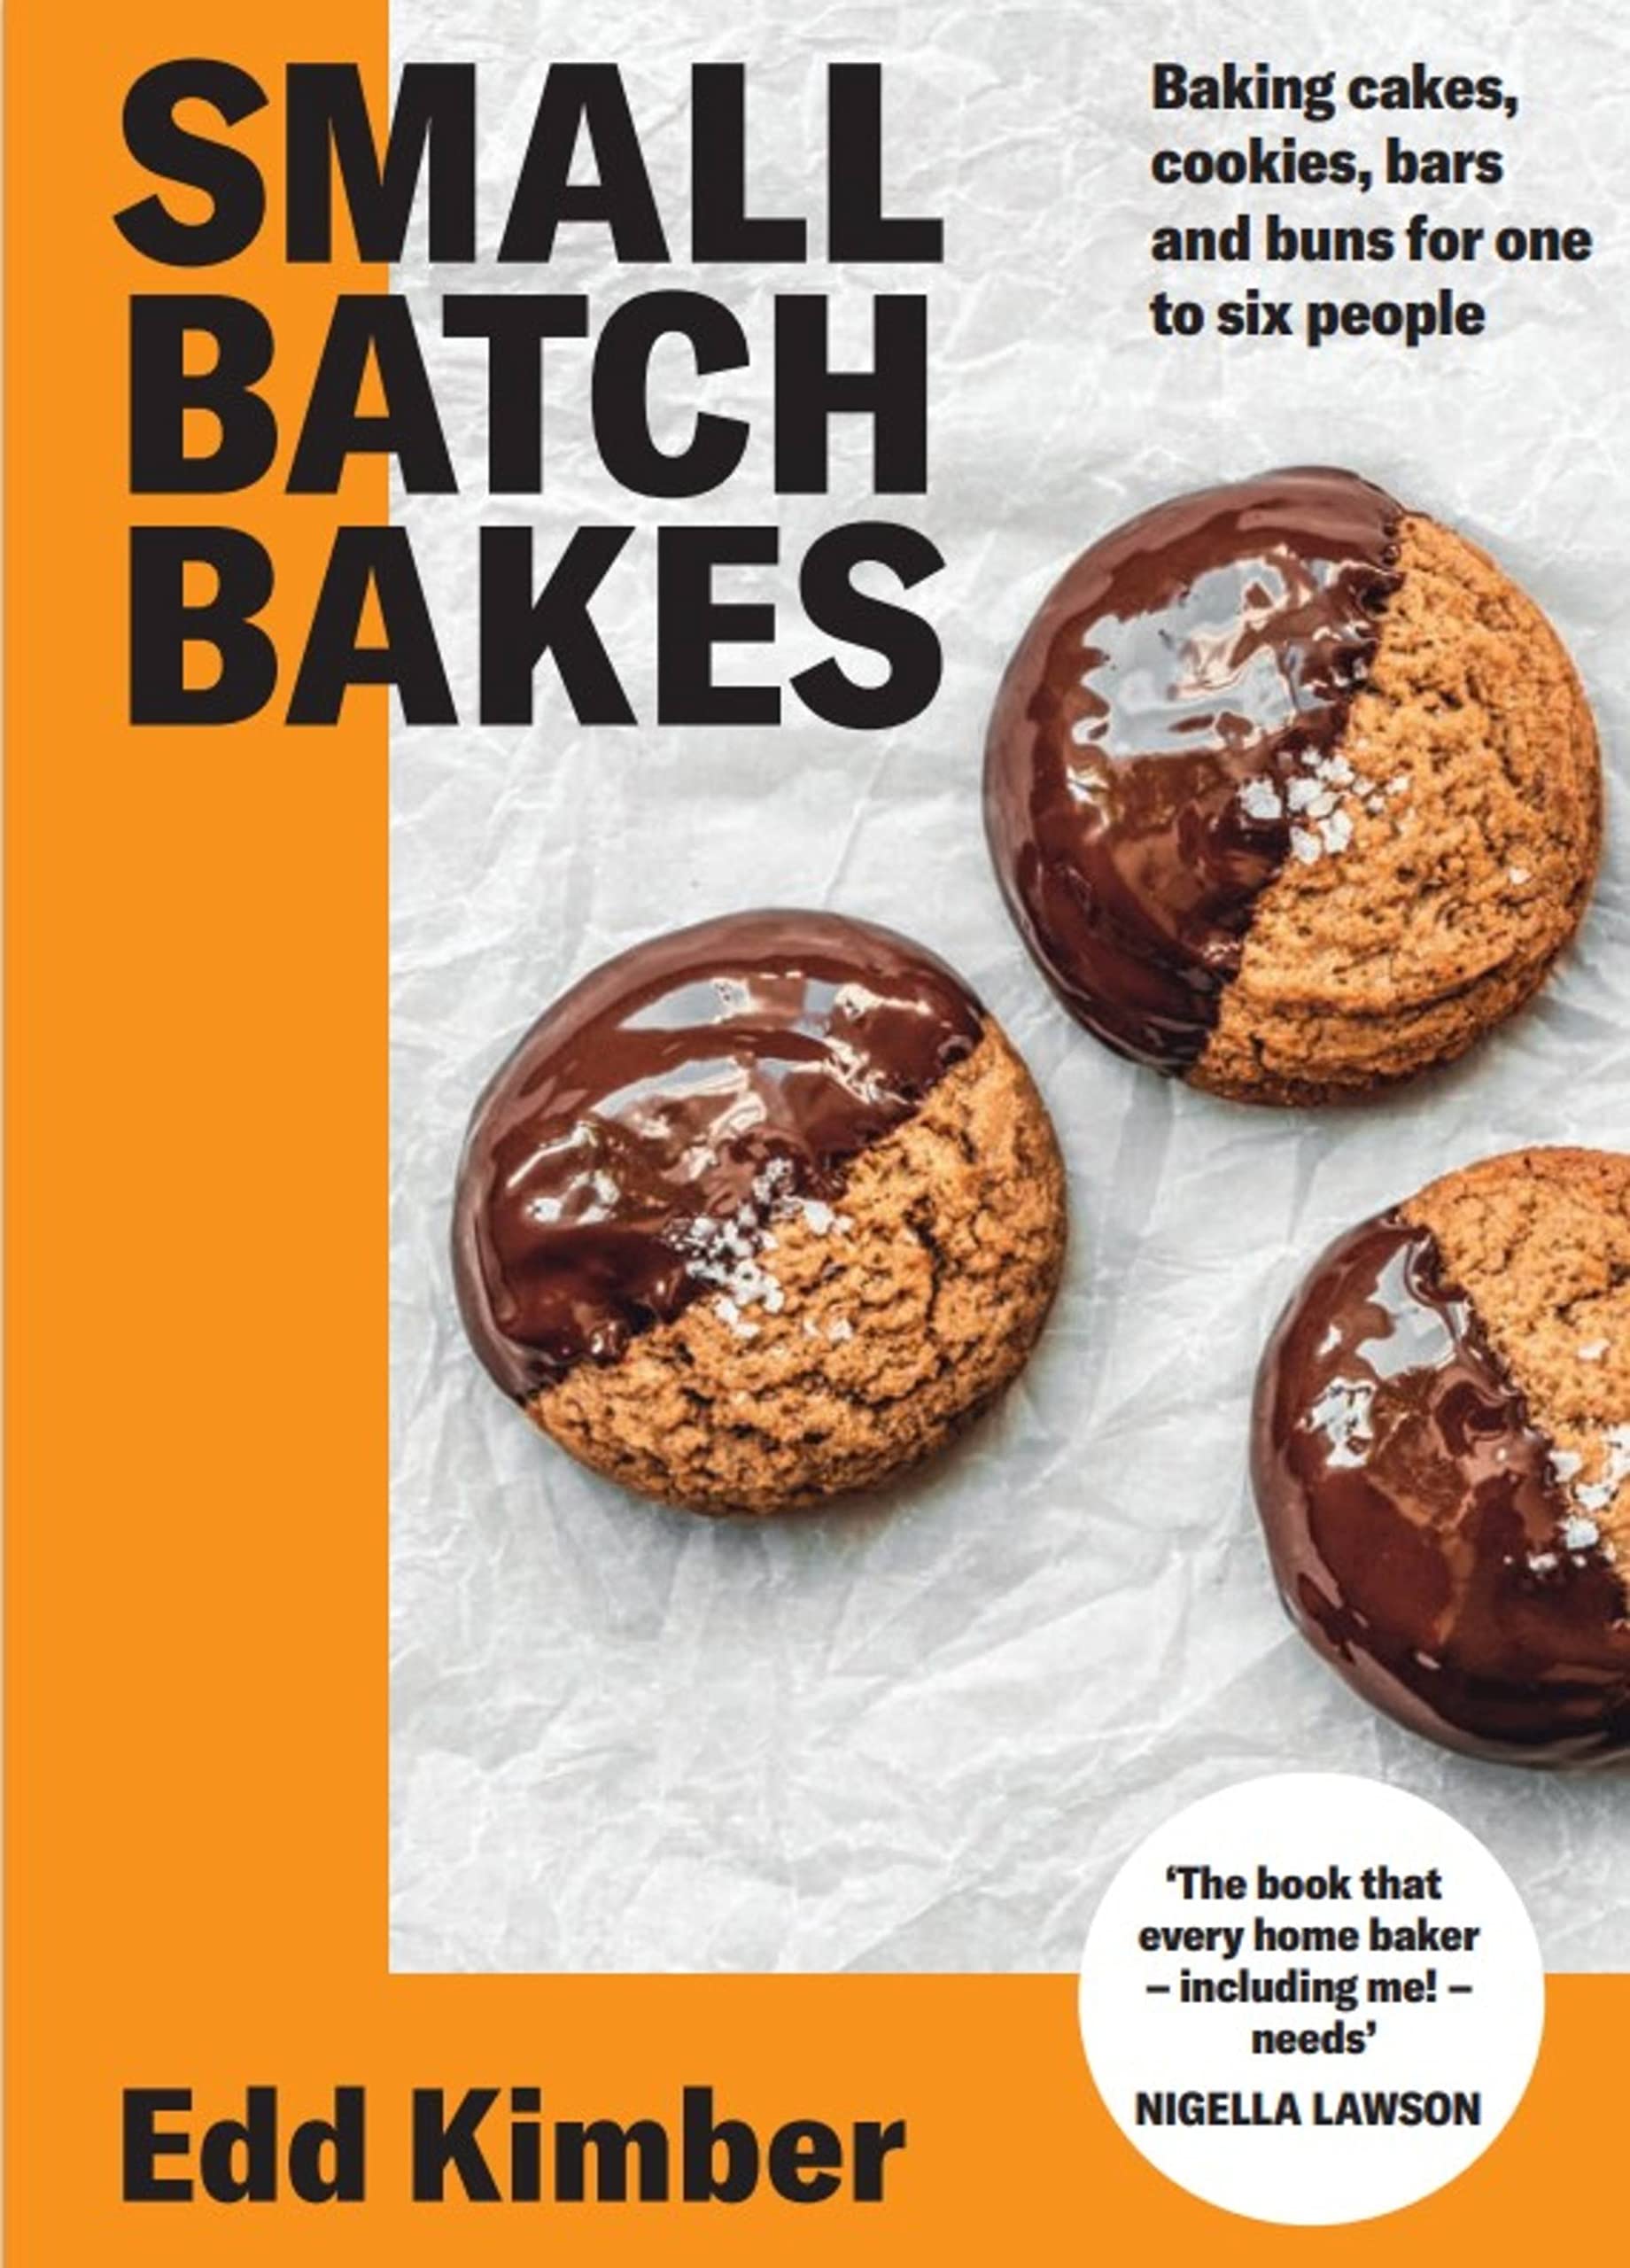 Small Batch Bakes: Baking cakes, cookies, bars and buns for one to six people (Edd Kimber)